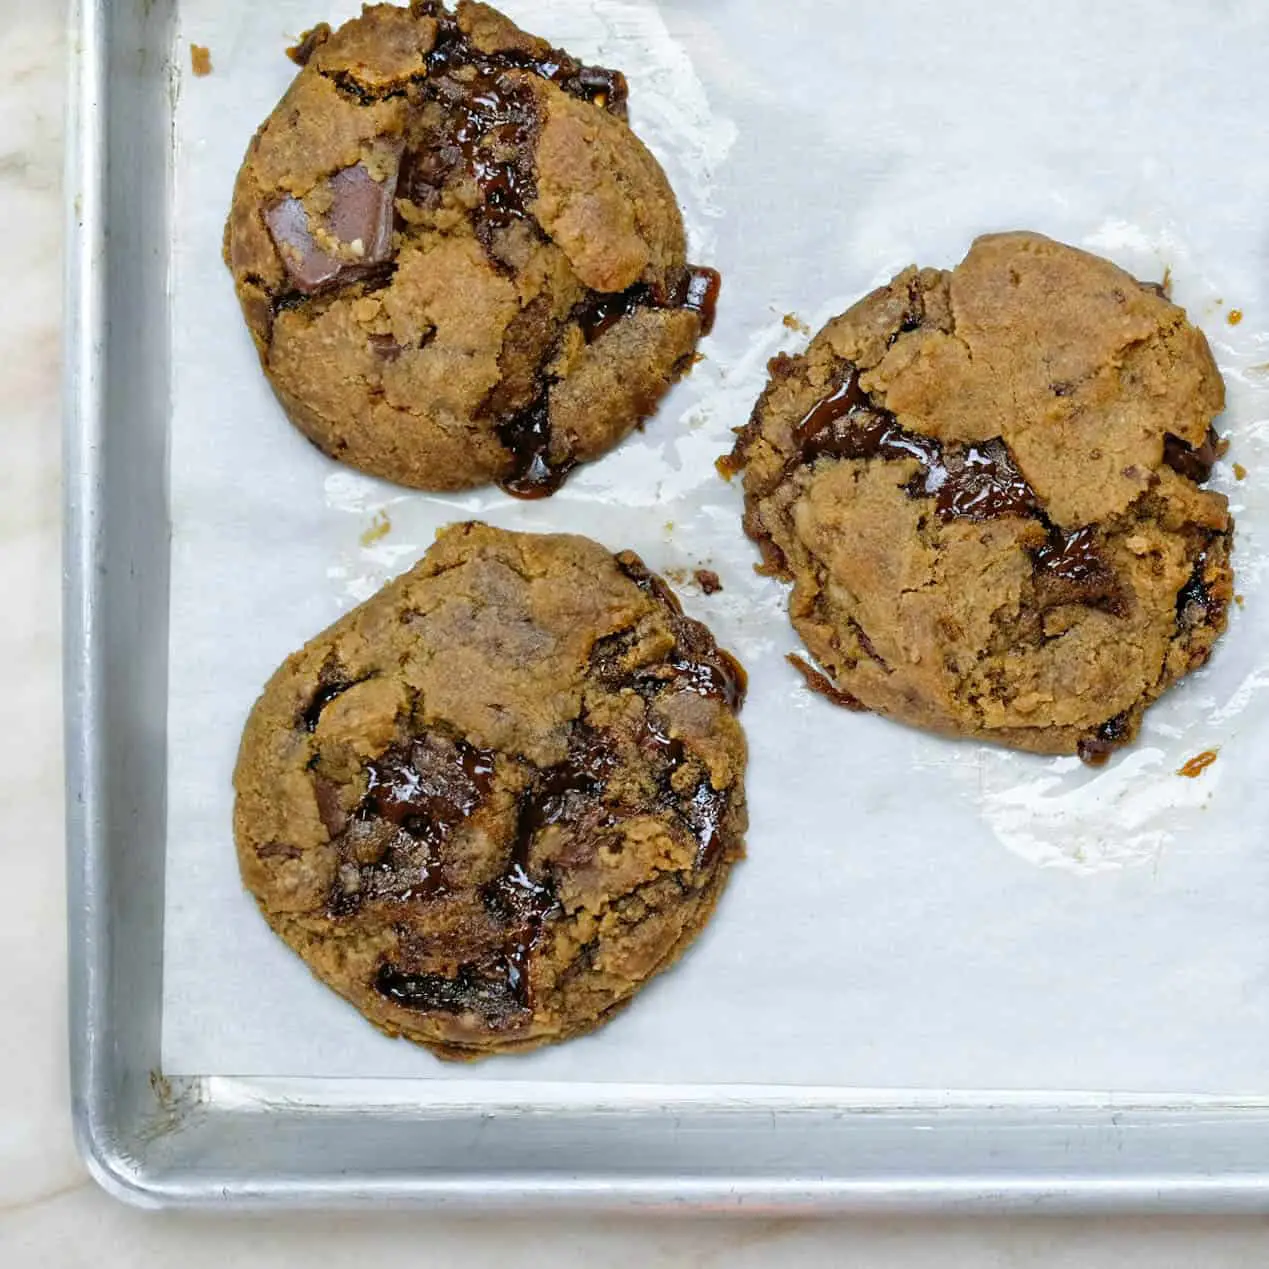 Just out of the oven Toffee Chocolate Cookies